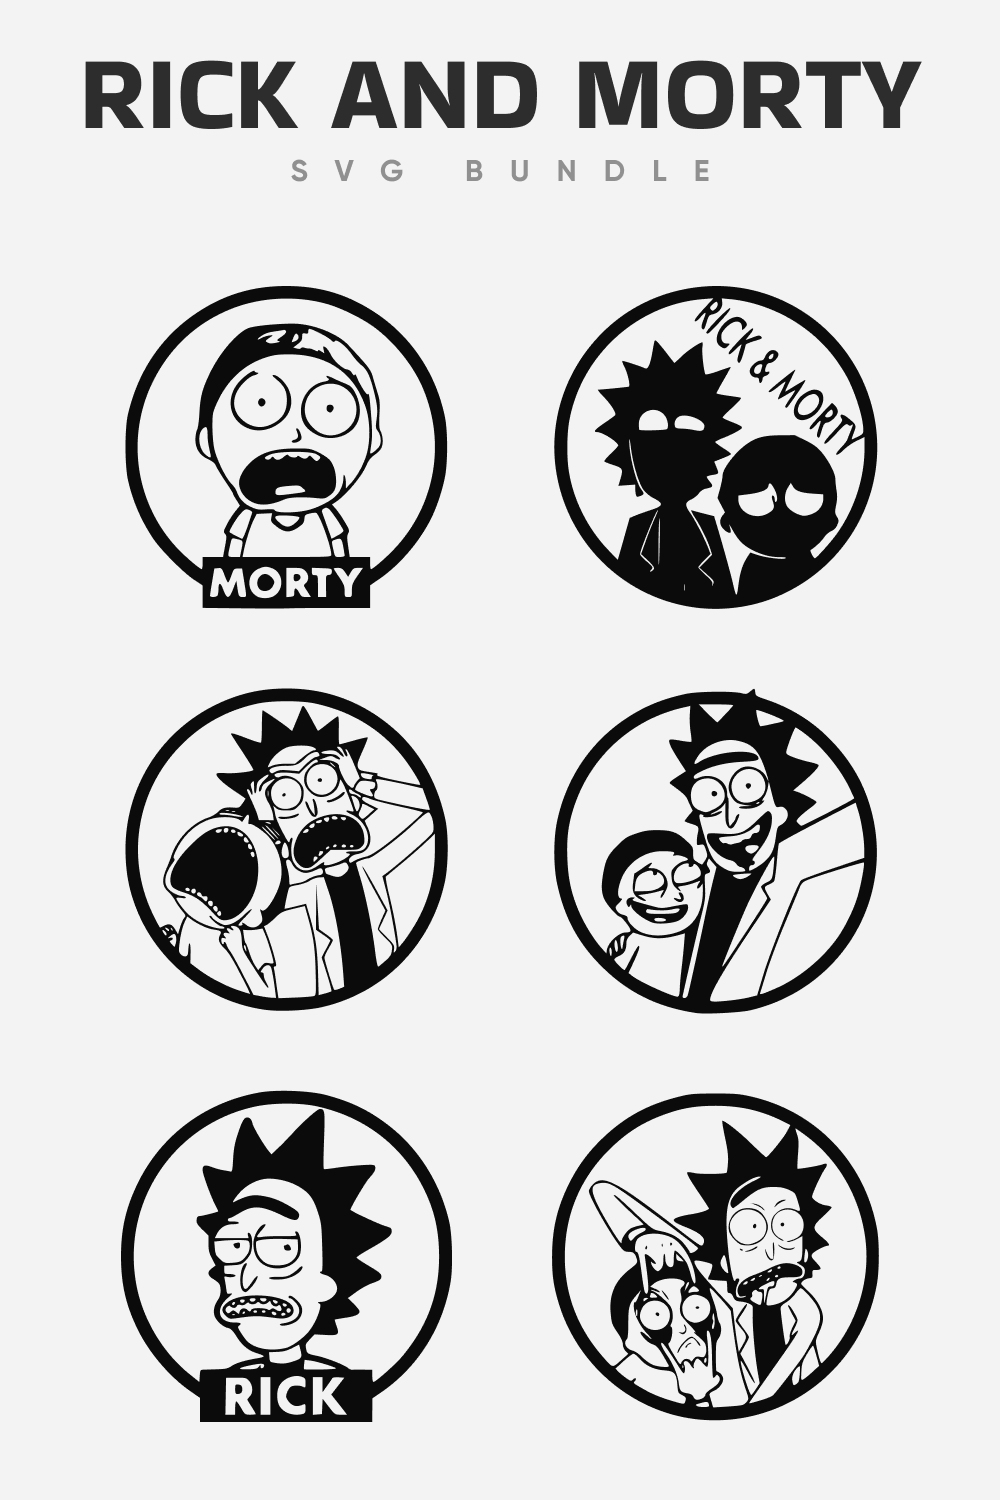 Six round images with Rick and Morty